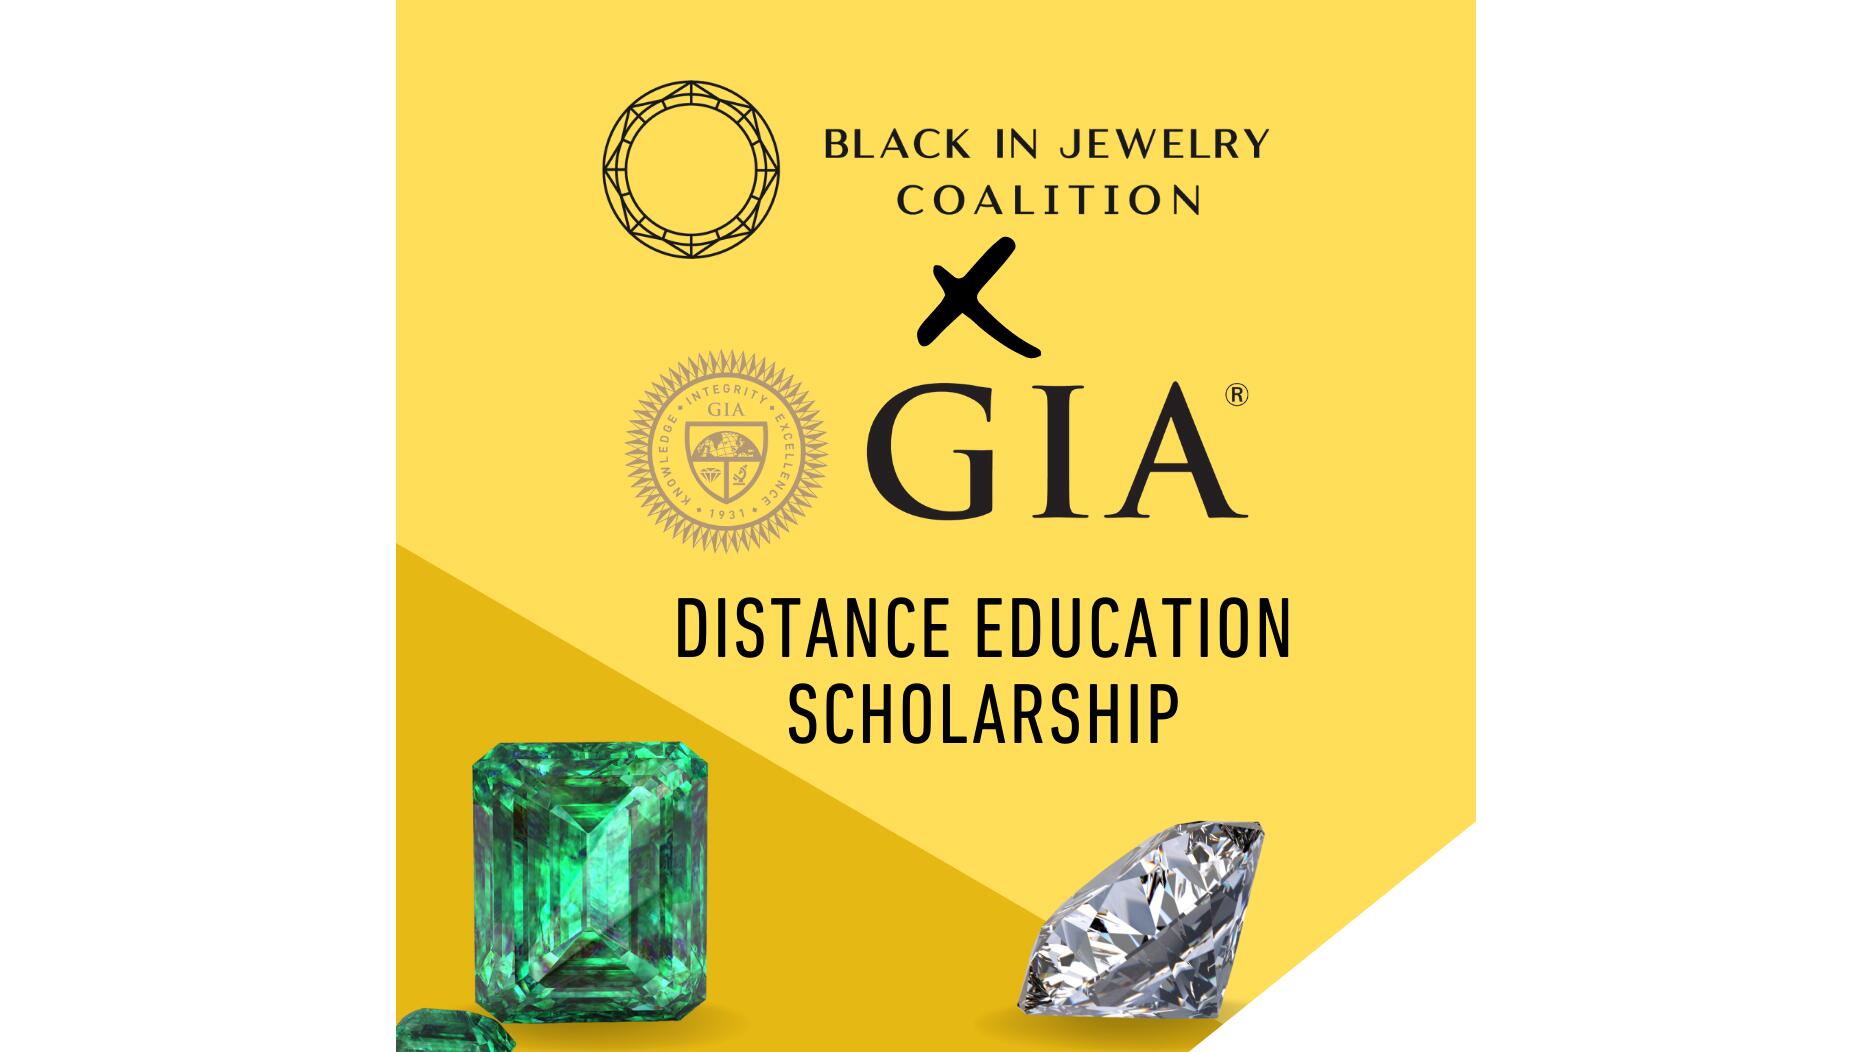 BIJC, GIA to Offer Distance Learning Scholarships